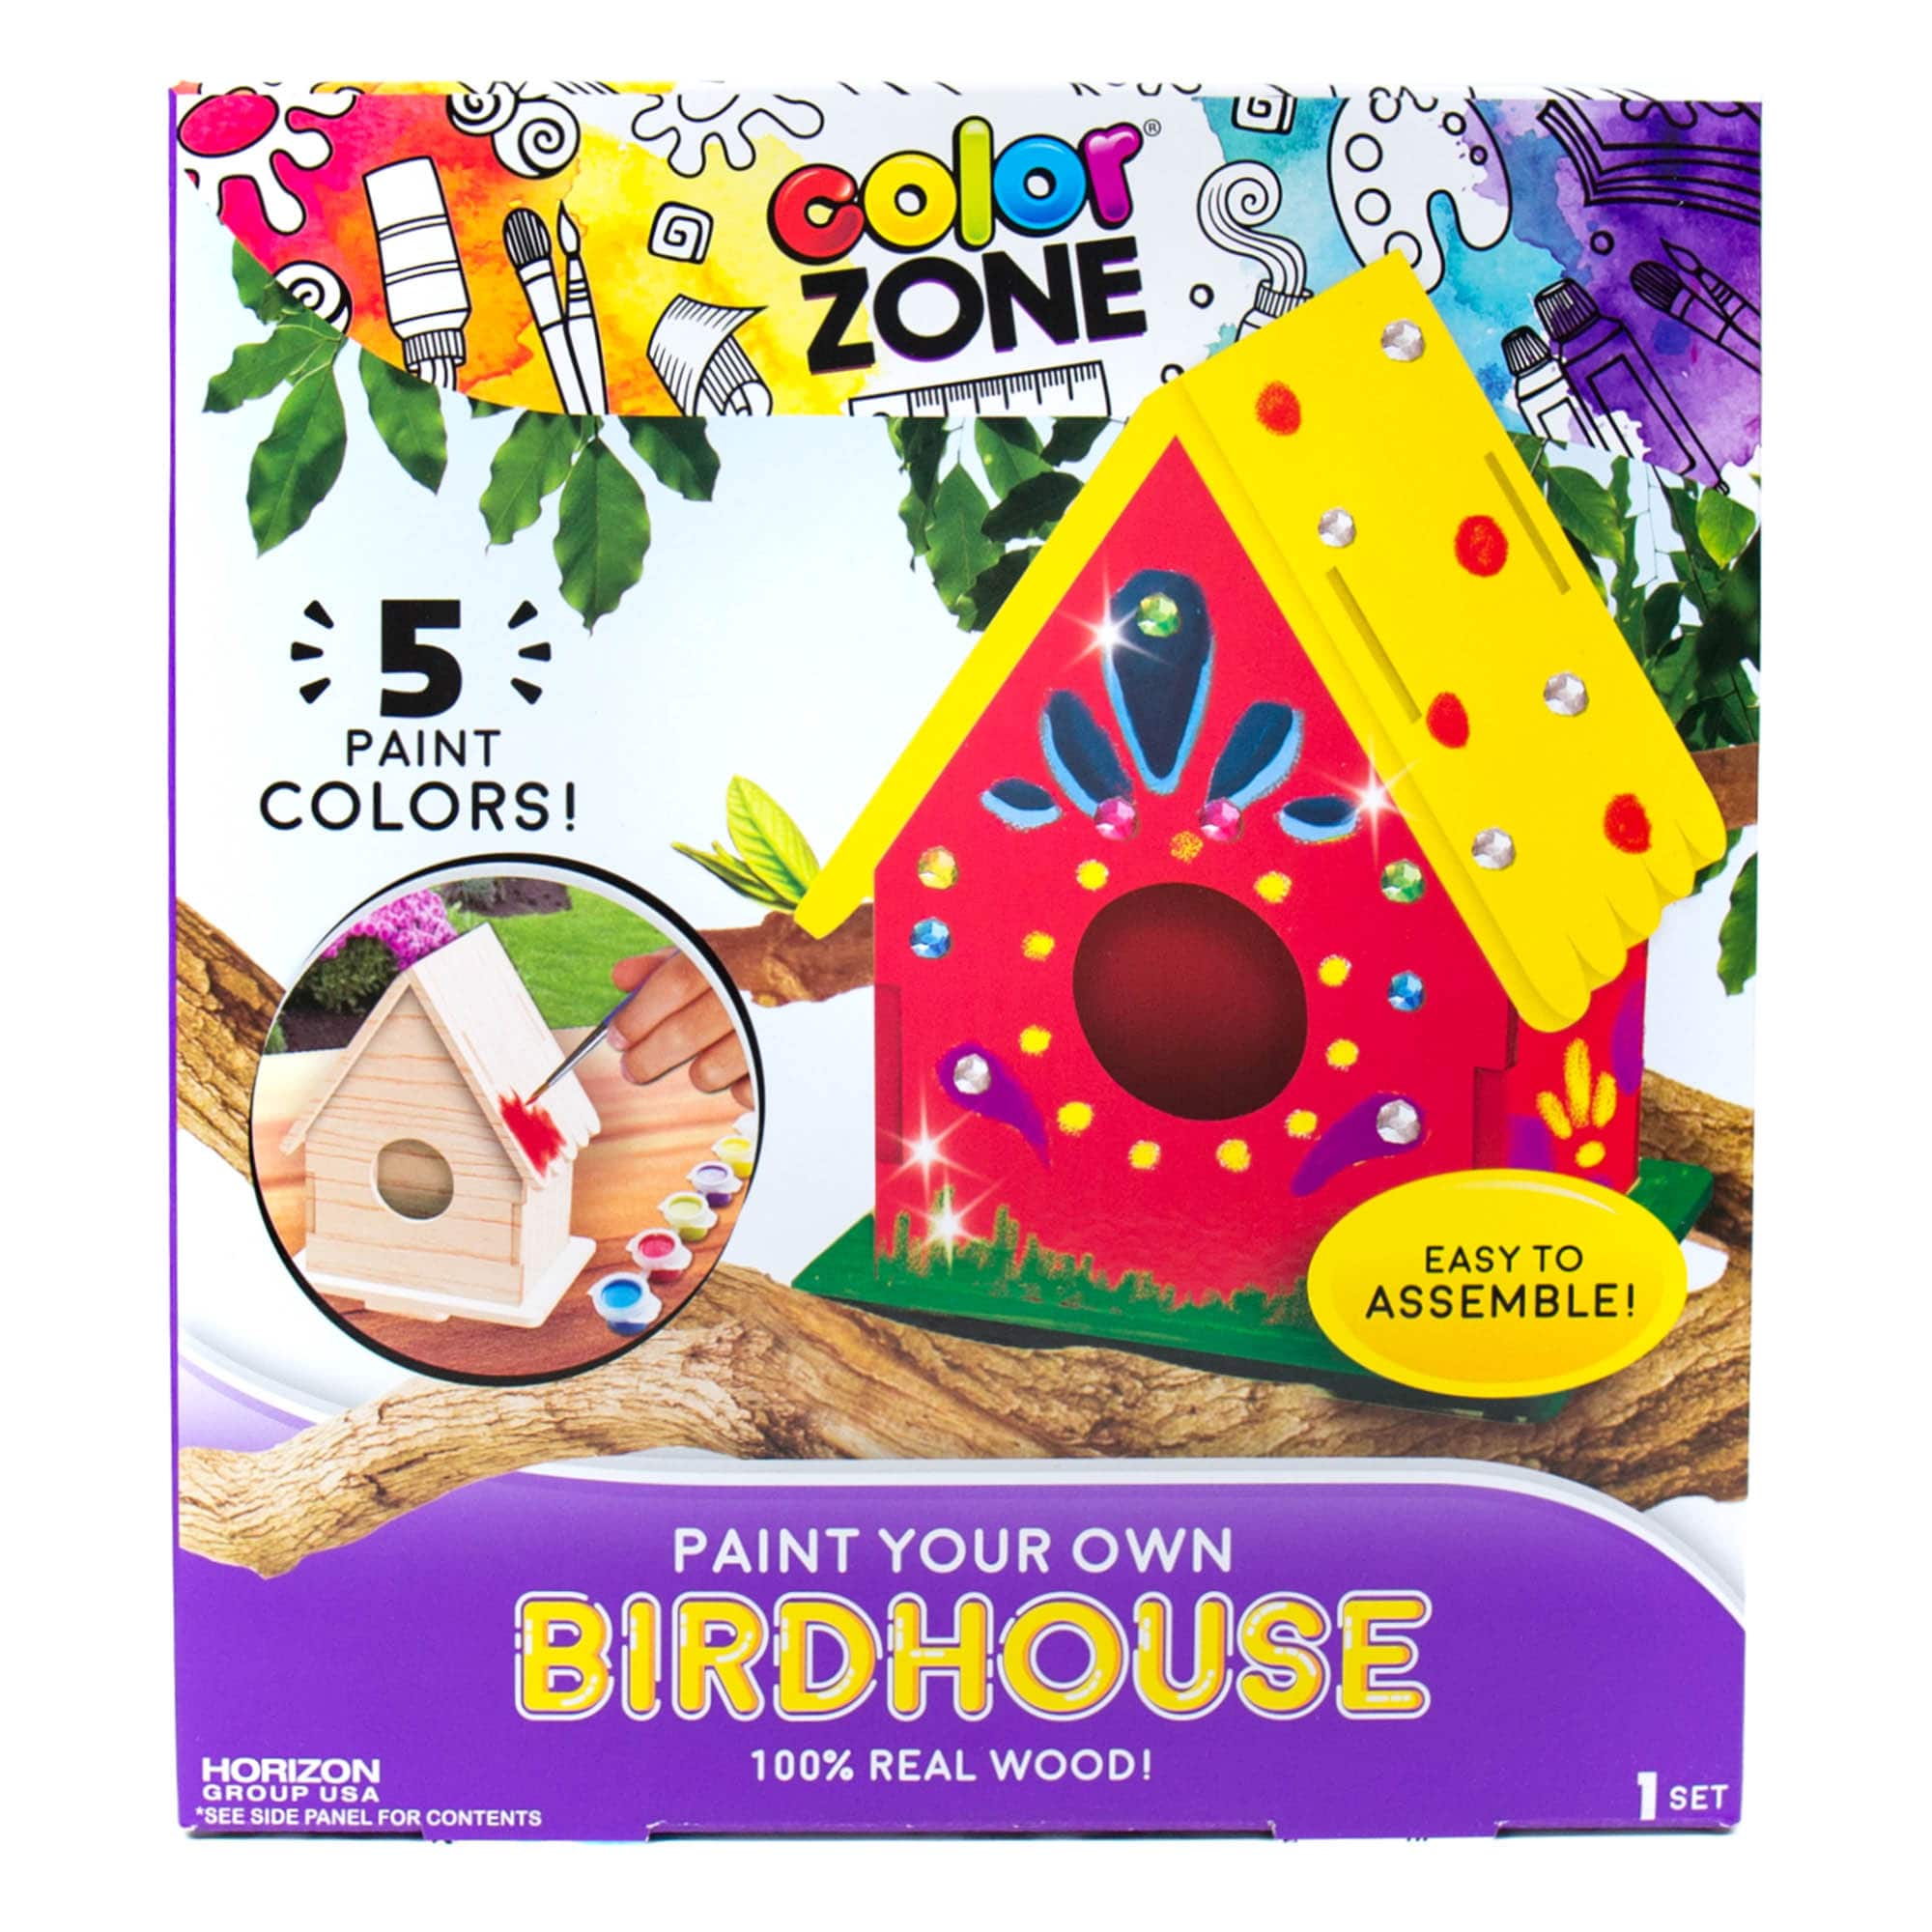  Craft Kits - 5 To 7 Years / Craft Kits / Arts & Crafts  Supplies: Toys & Games